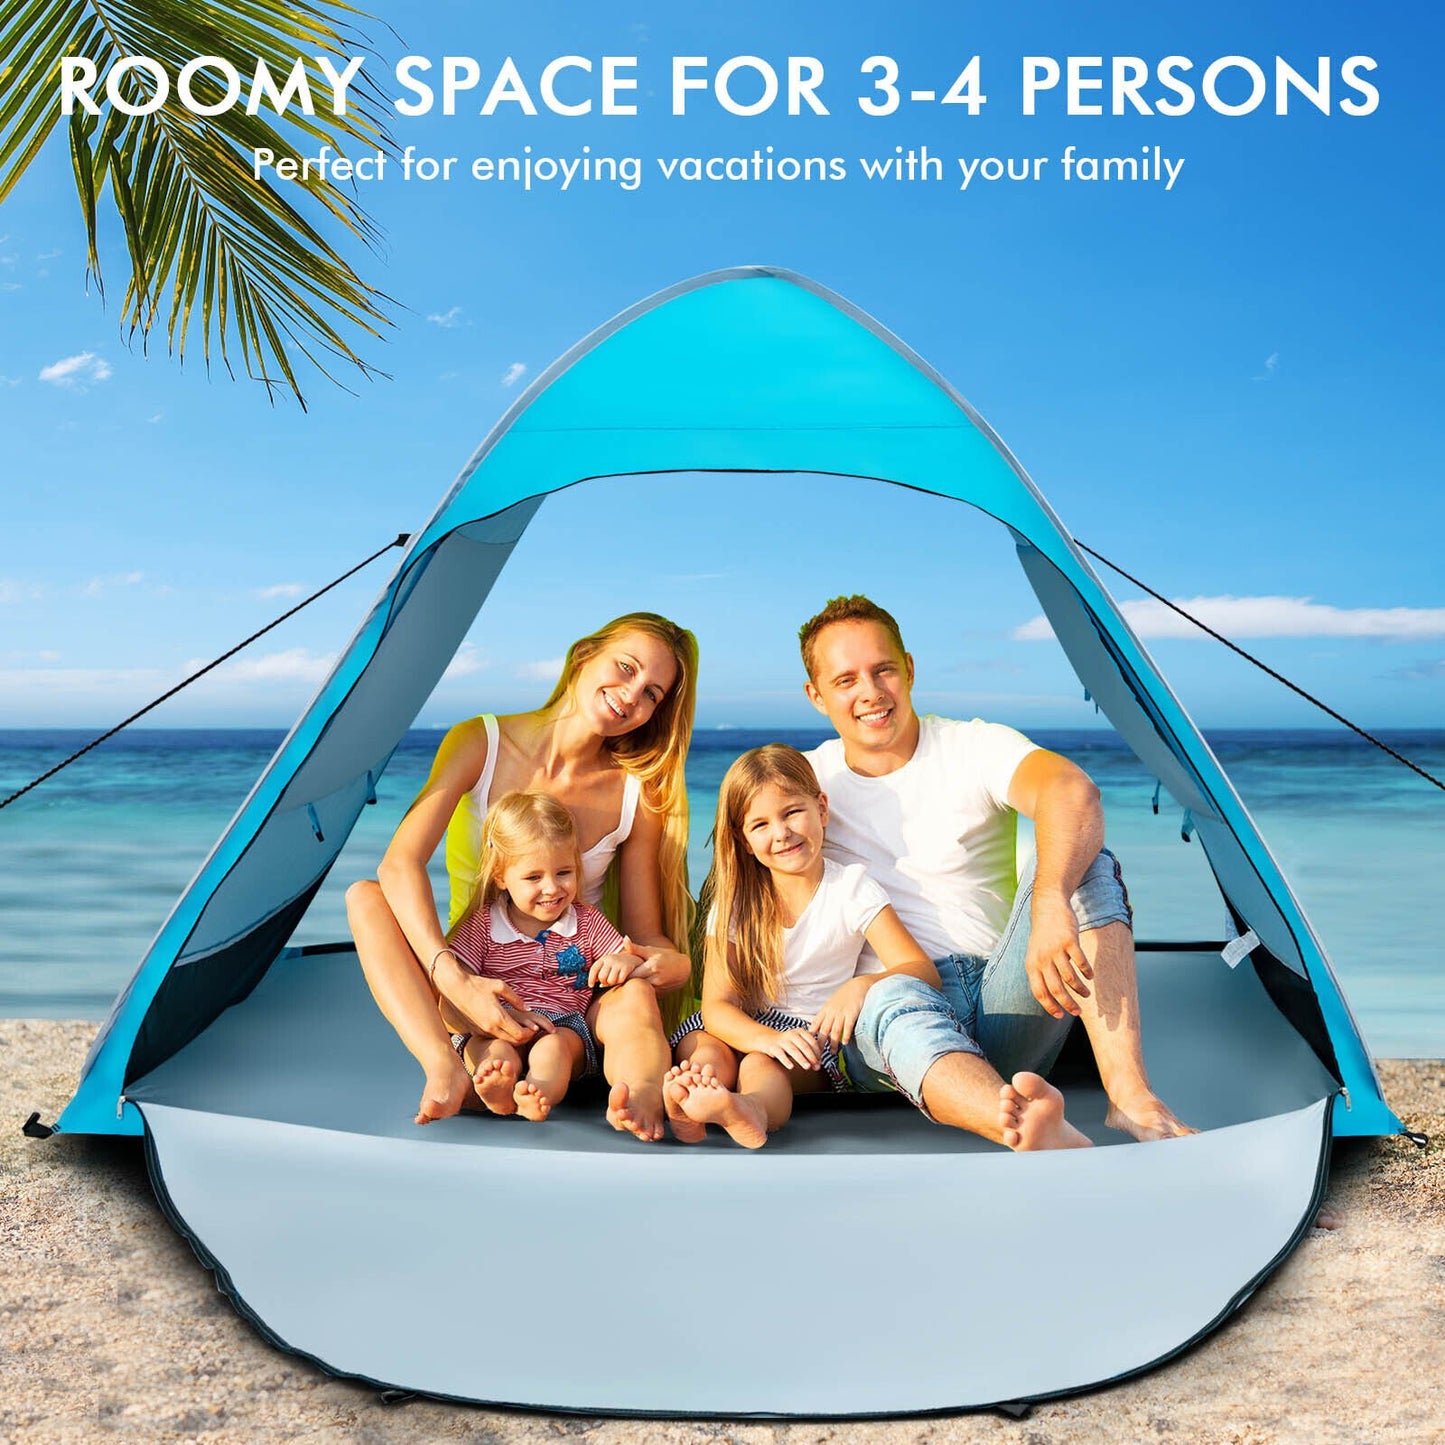 Automatic Pop-up Beach Tent with Carrying Bag, Blue at Gallery Canada